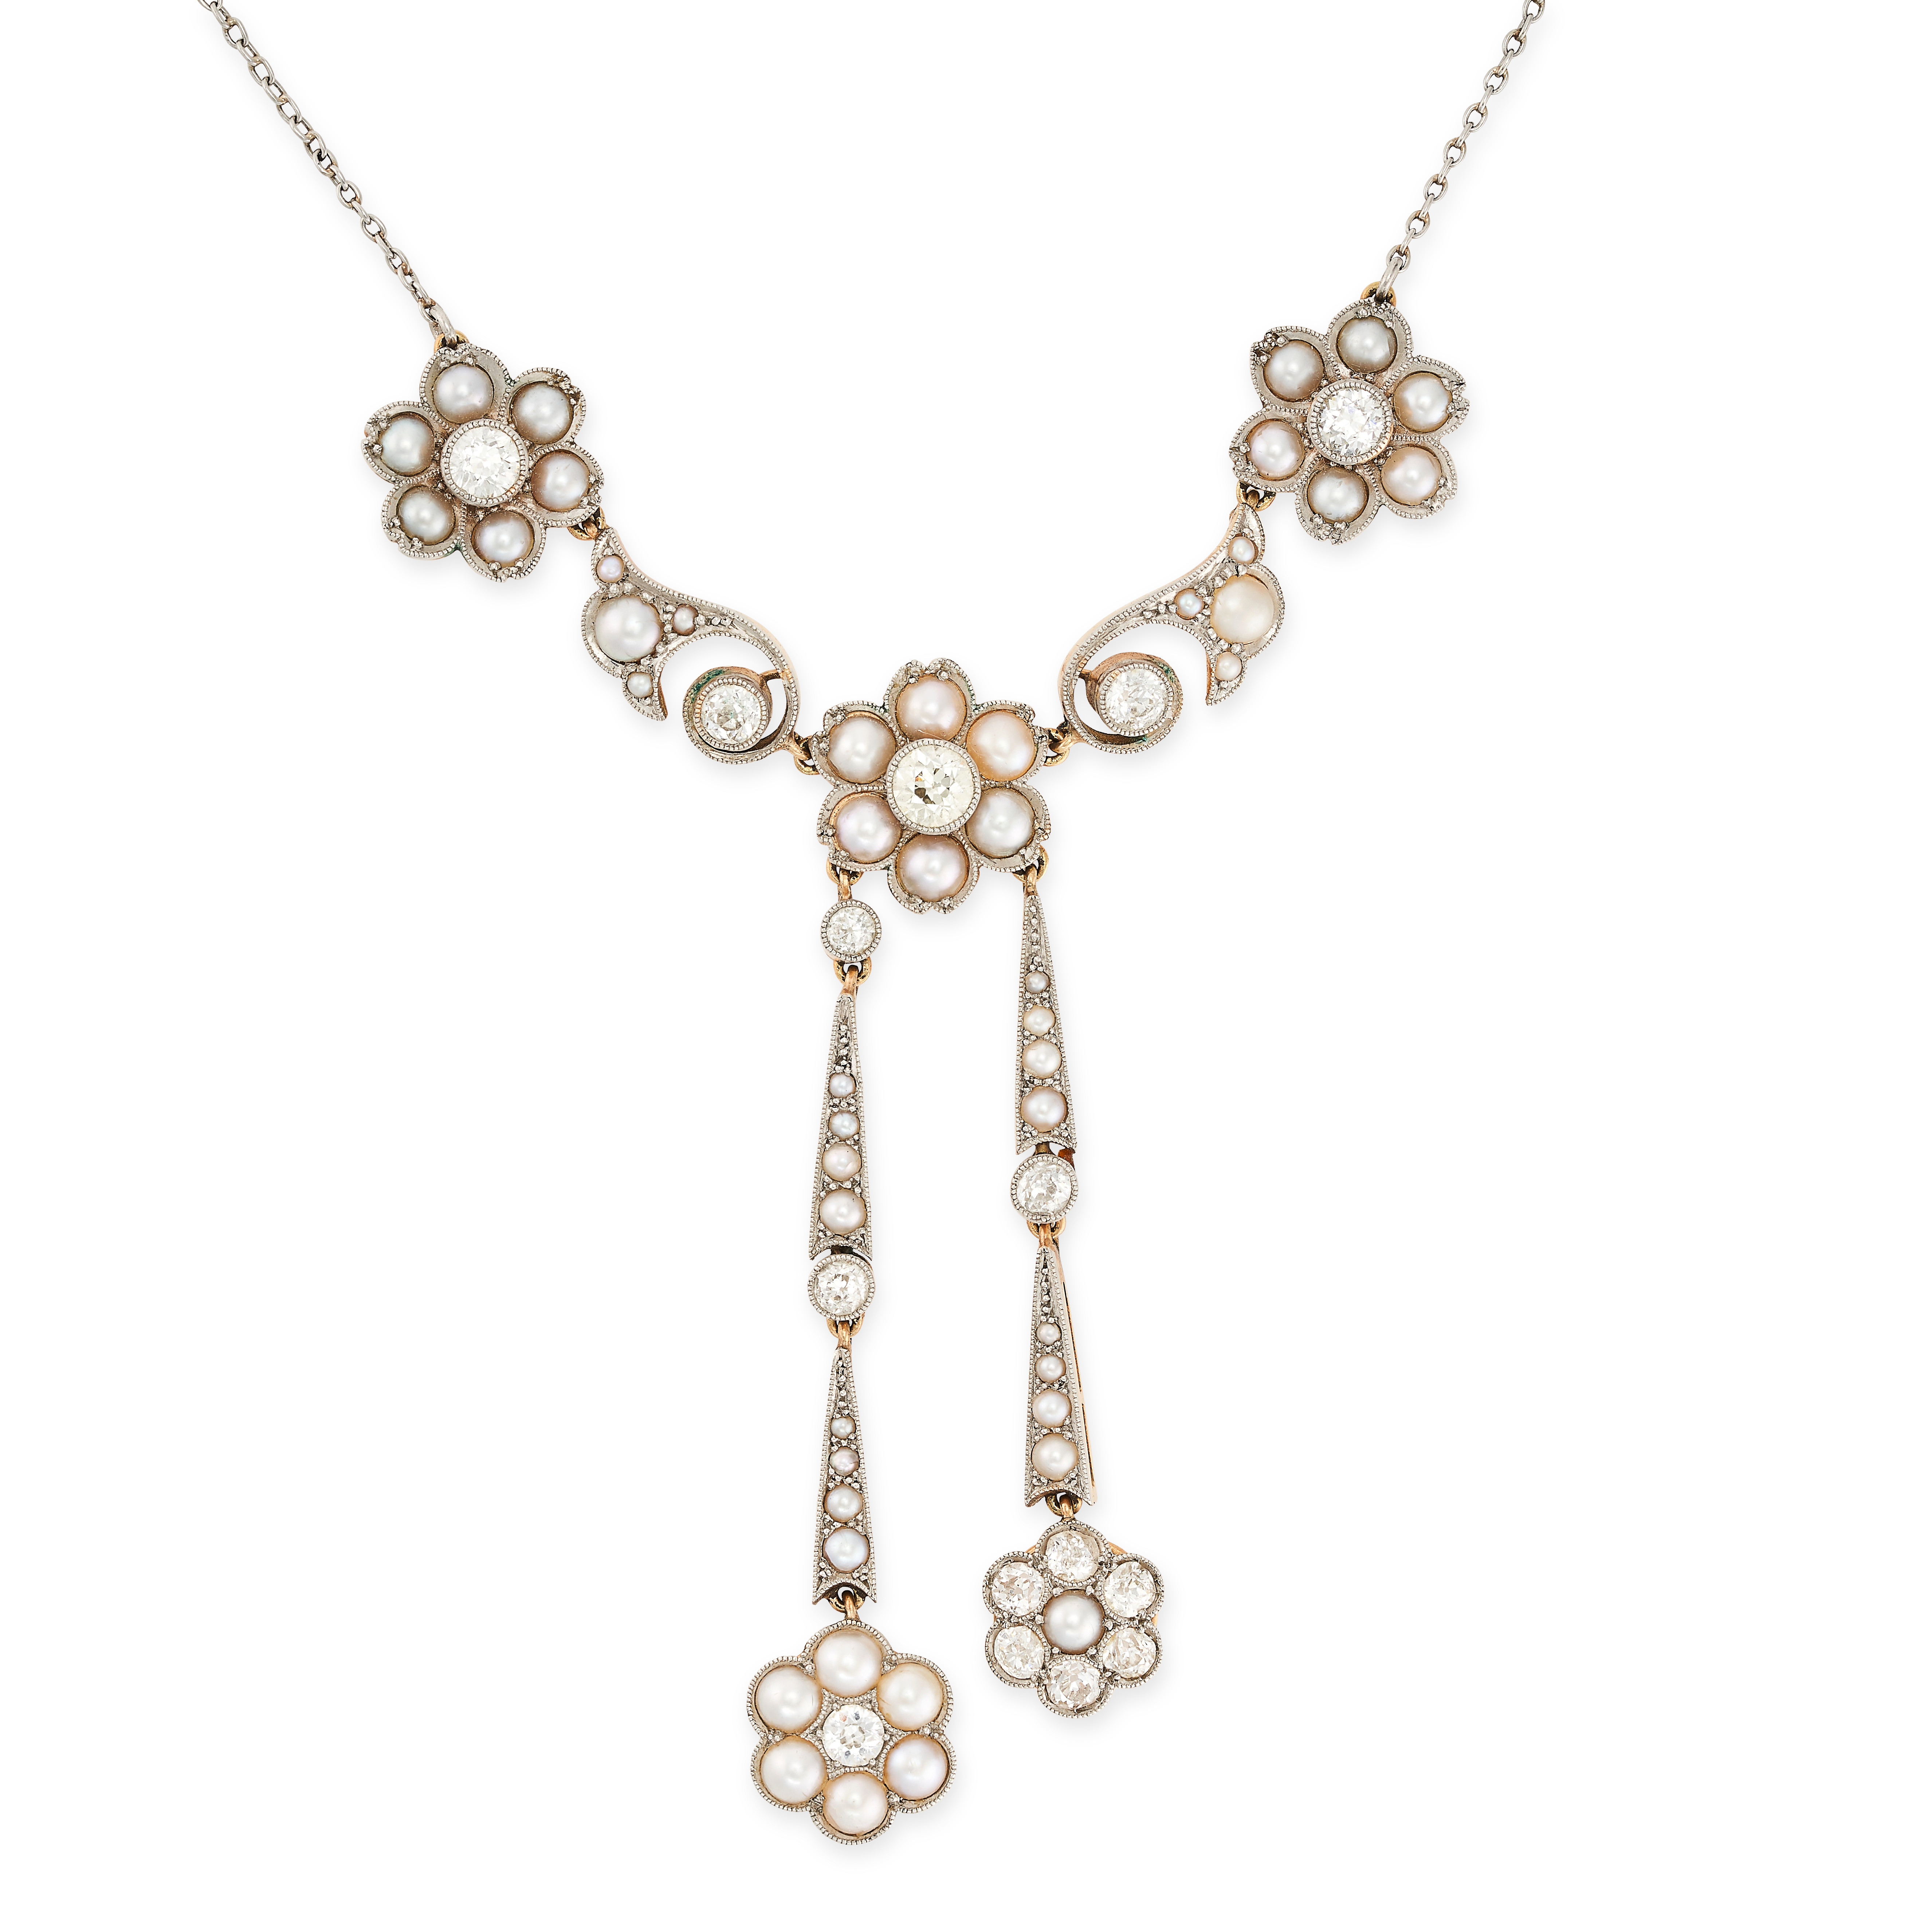 A PEARL AND DIAMOND LAVALIER NECKLACE the chain link necklace set with three flower motifs